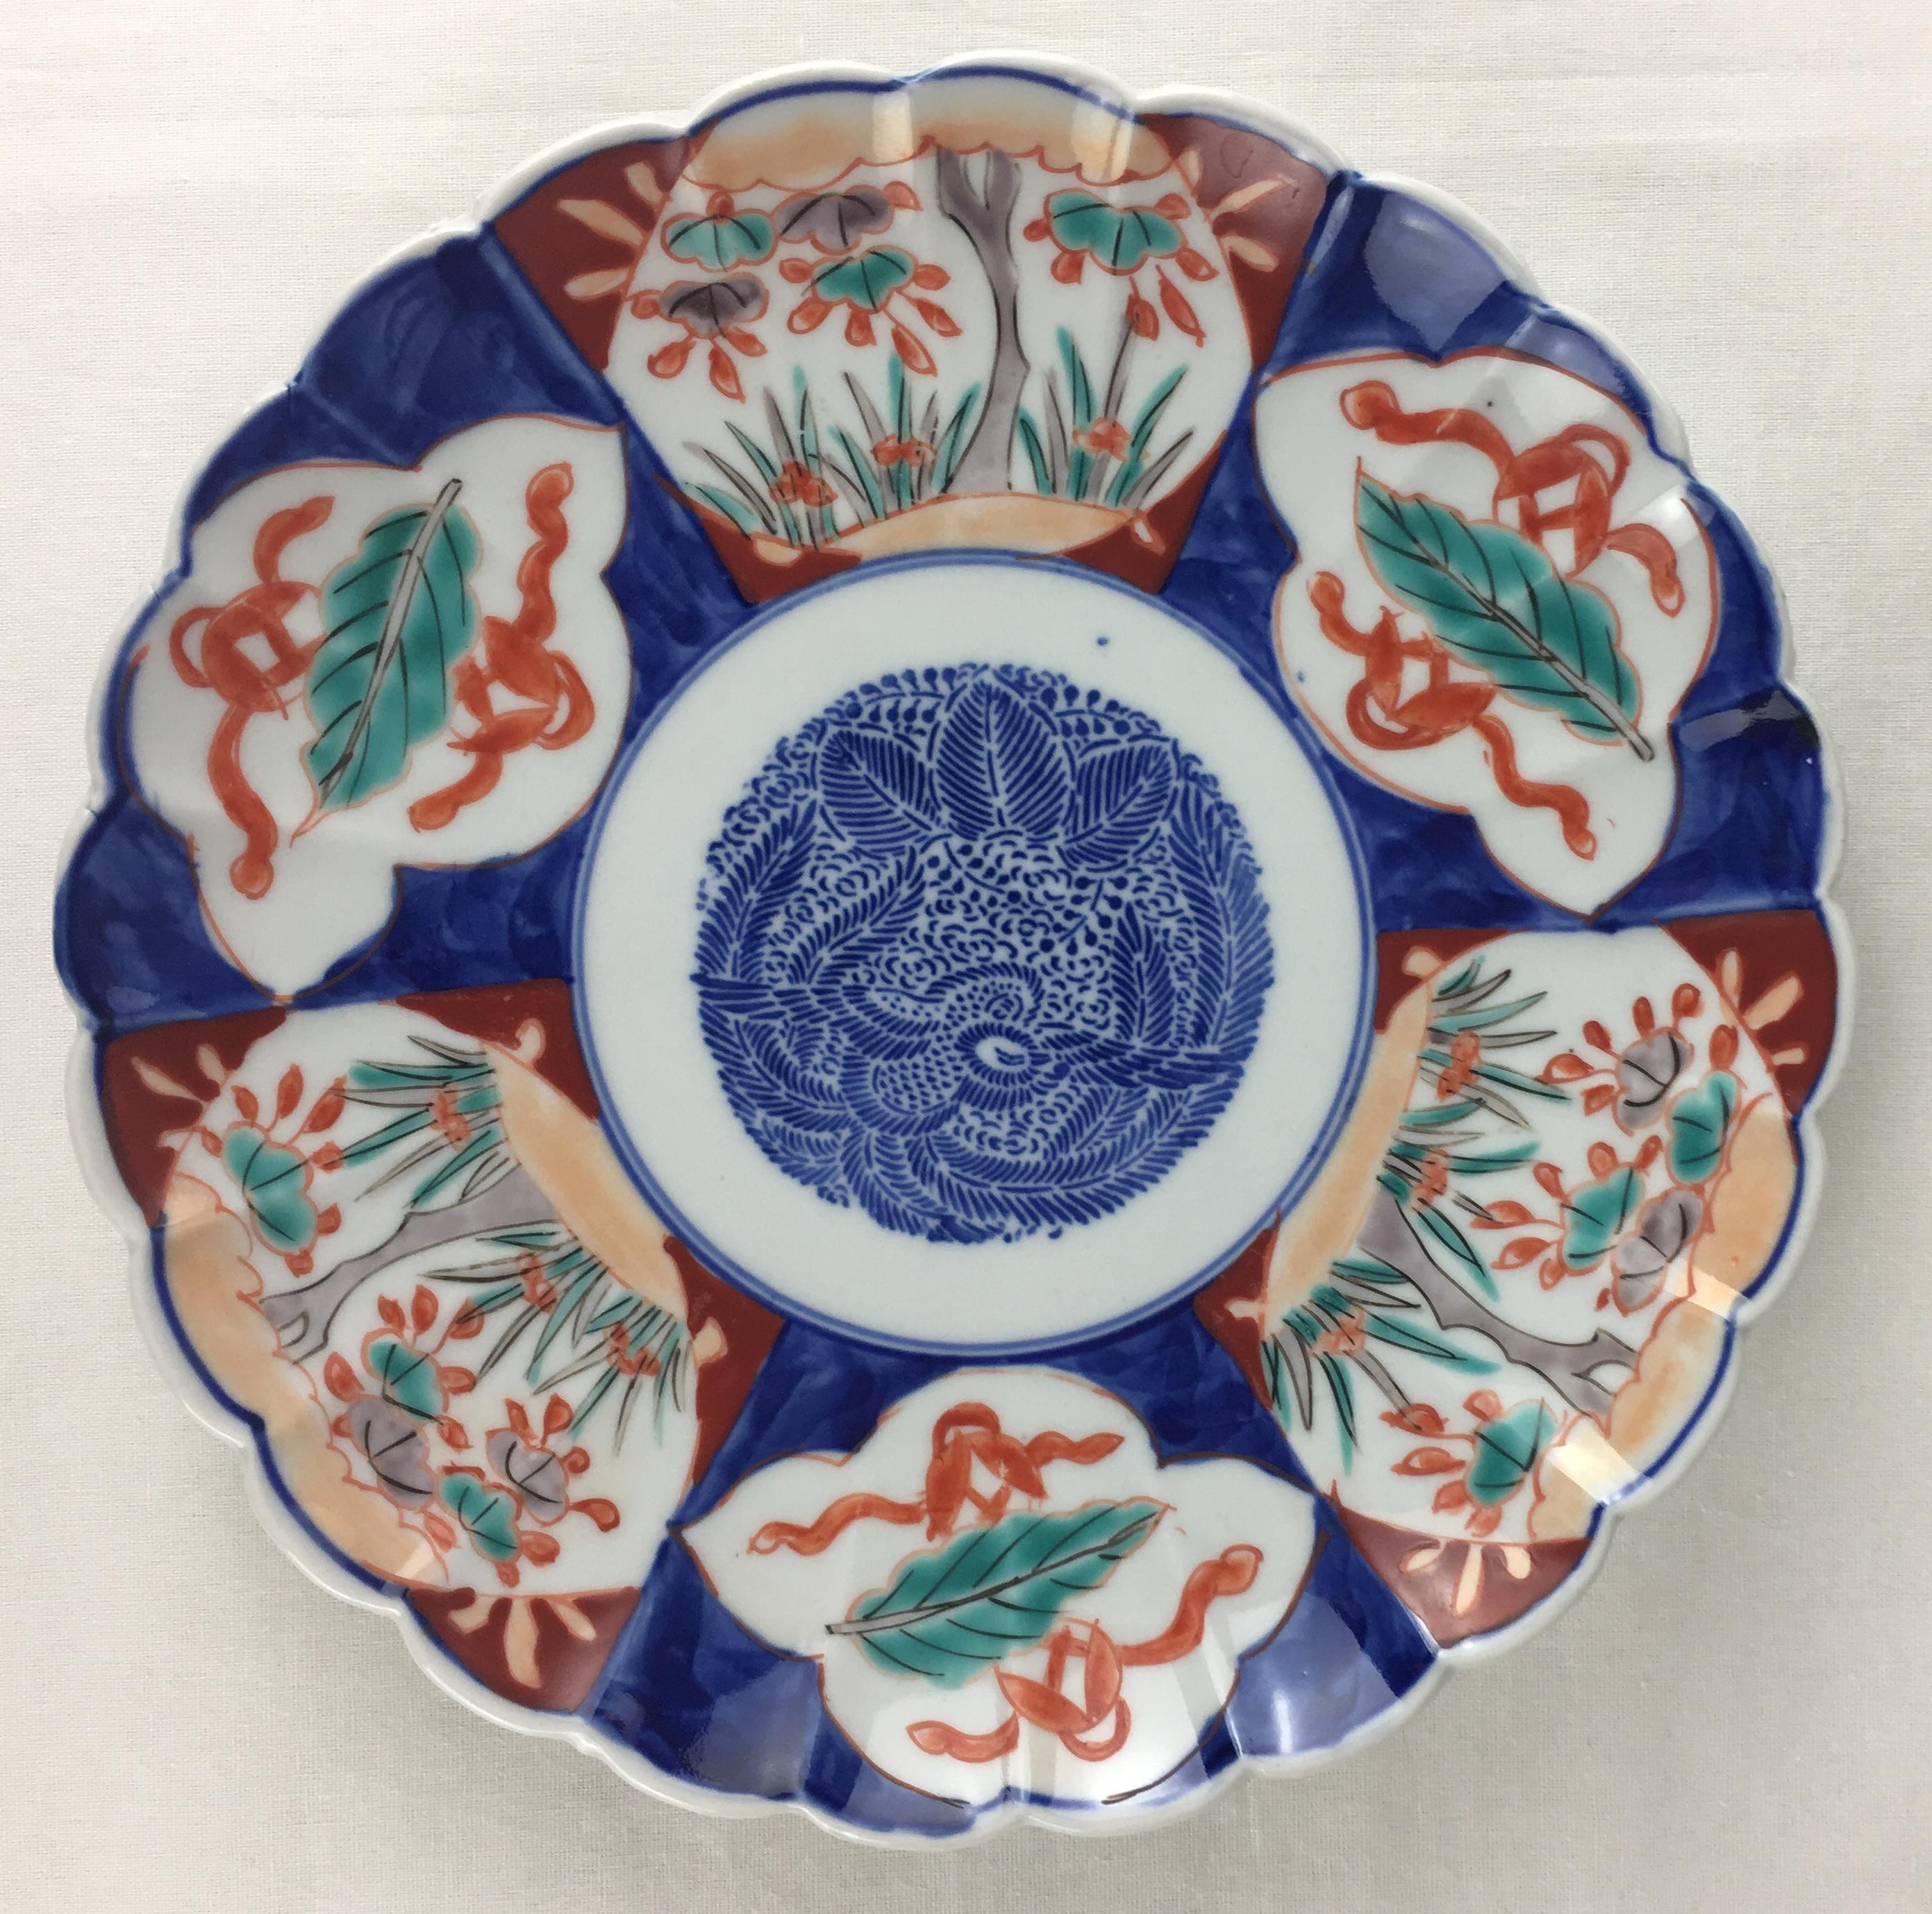 A fine collection of nine good quality 19th century Japanese Imari porcelain chargers. Varying motifs and dimensions, measurements are between 7 3/4 